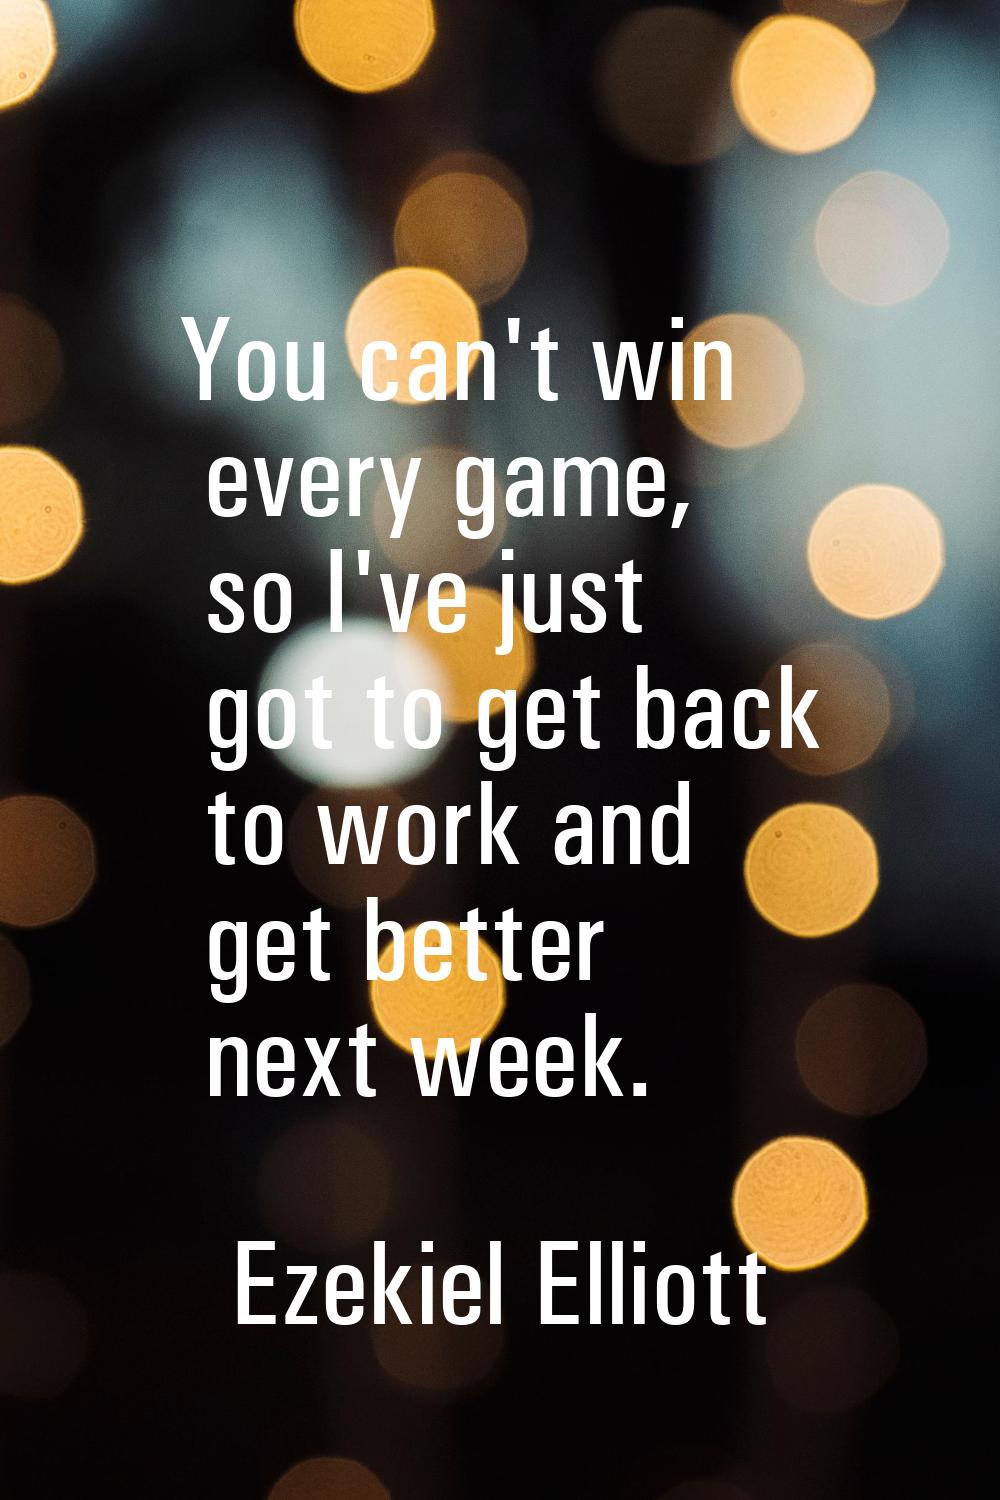 You can't win every game, so I've just got to get back to work and get better next week.